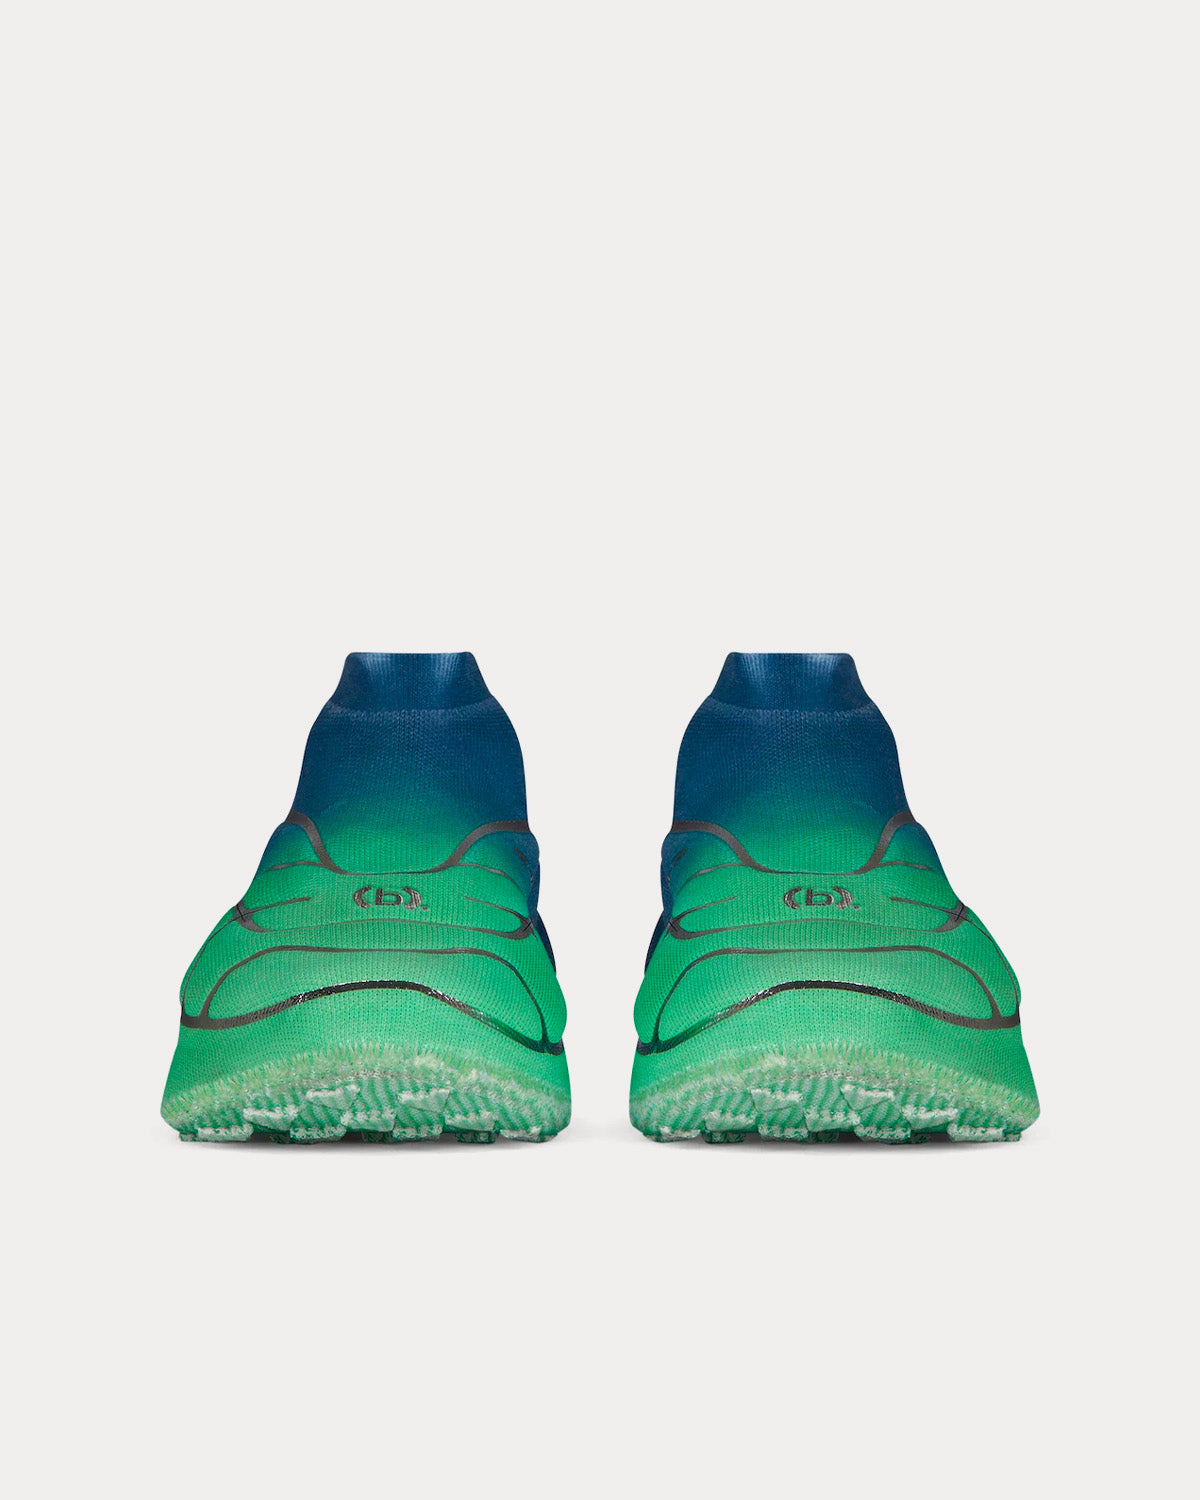 Givenchy x BSTROY TK-360+ Mid Mesh Blue / Green Slip On Sneakers 